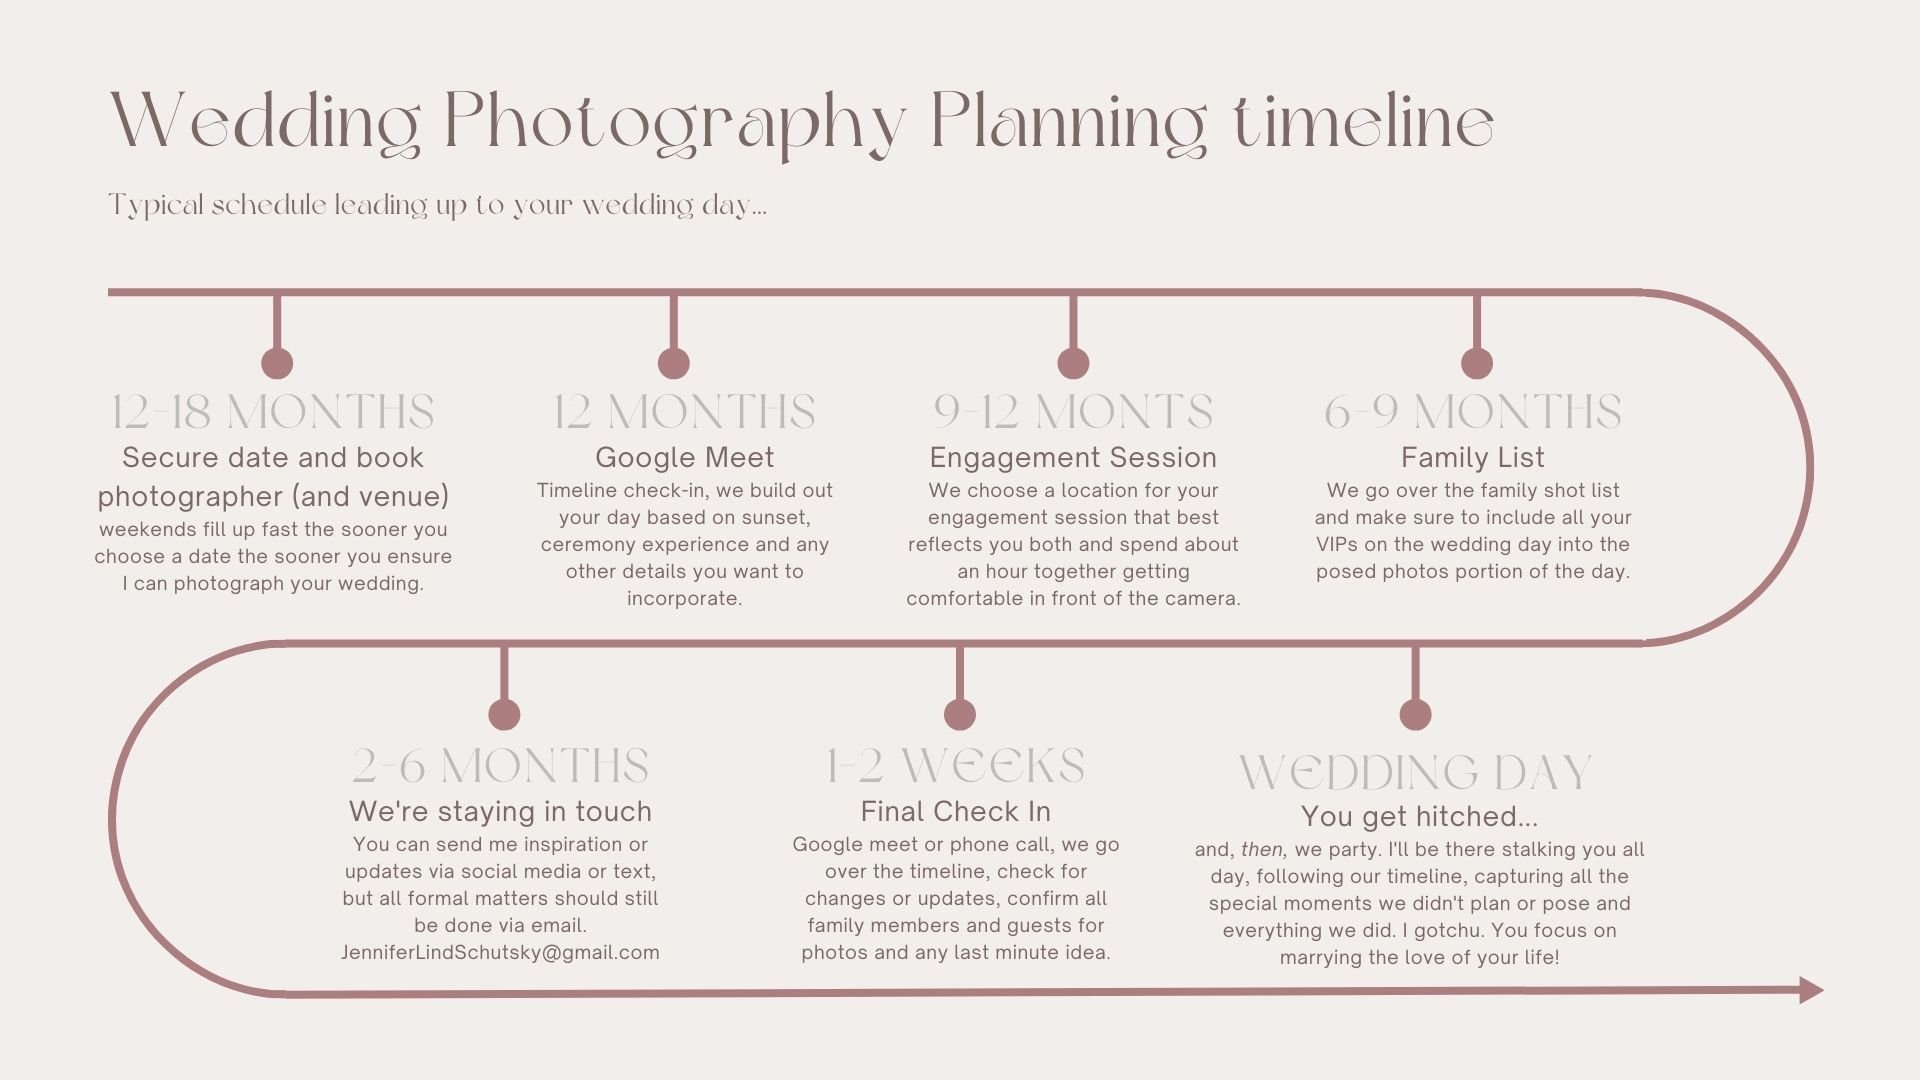 Wedding Photography Timeline Guide for what to expect for wedding photography with destination wedding photographer; Jennifer Lind Schutsky 